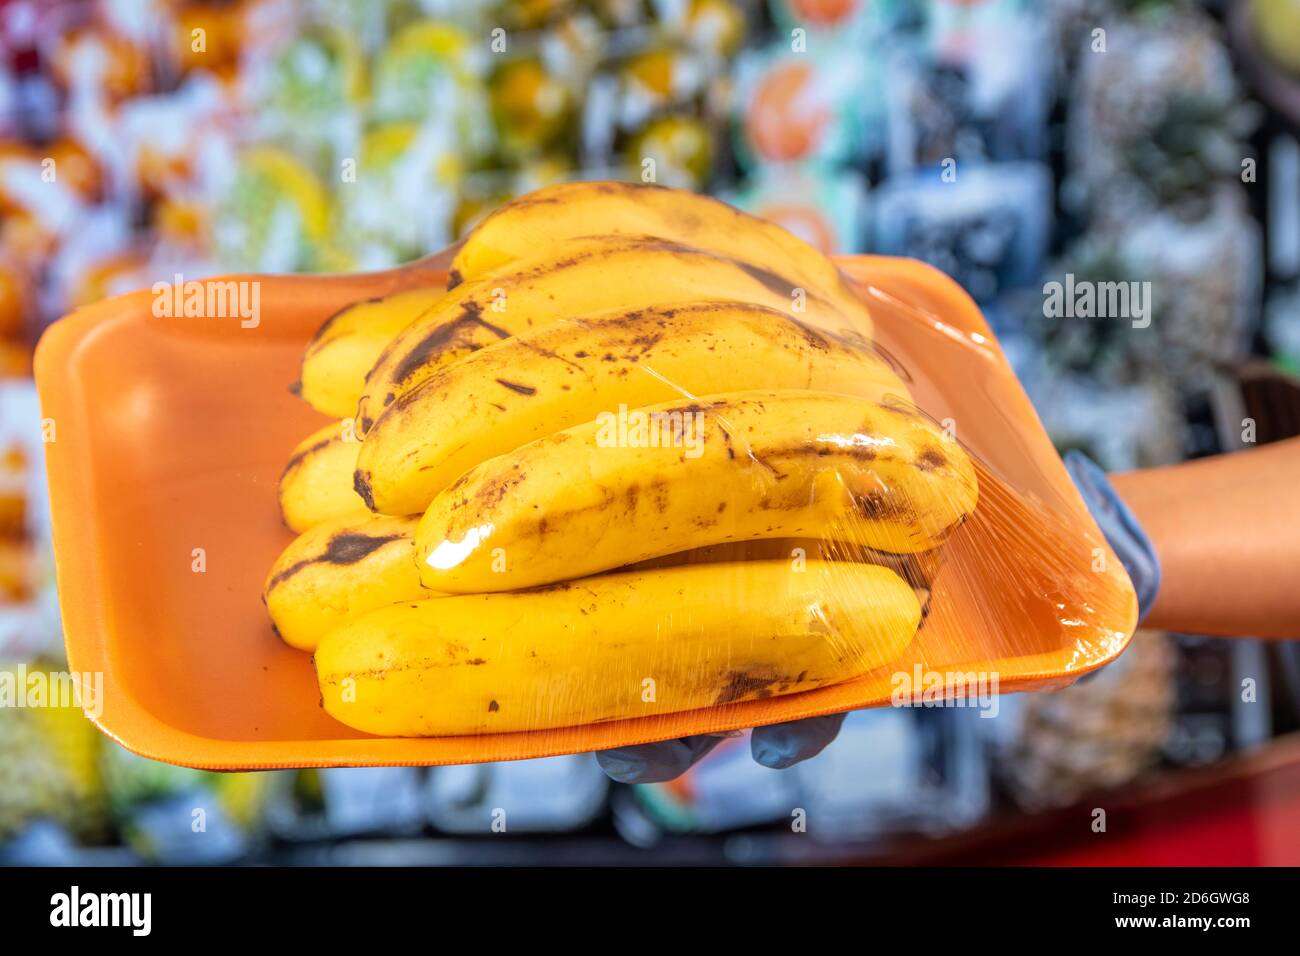 https://c8.alamy.com/comp/2D6GWG8/new-normal-after-covid-19-pandemic-a-hand-with-blue-protective-gloves-holds-a-plastic-wrapped-plate-with-bananas-in-background-vegetables-fruits-2D6GWG8.jpg